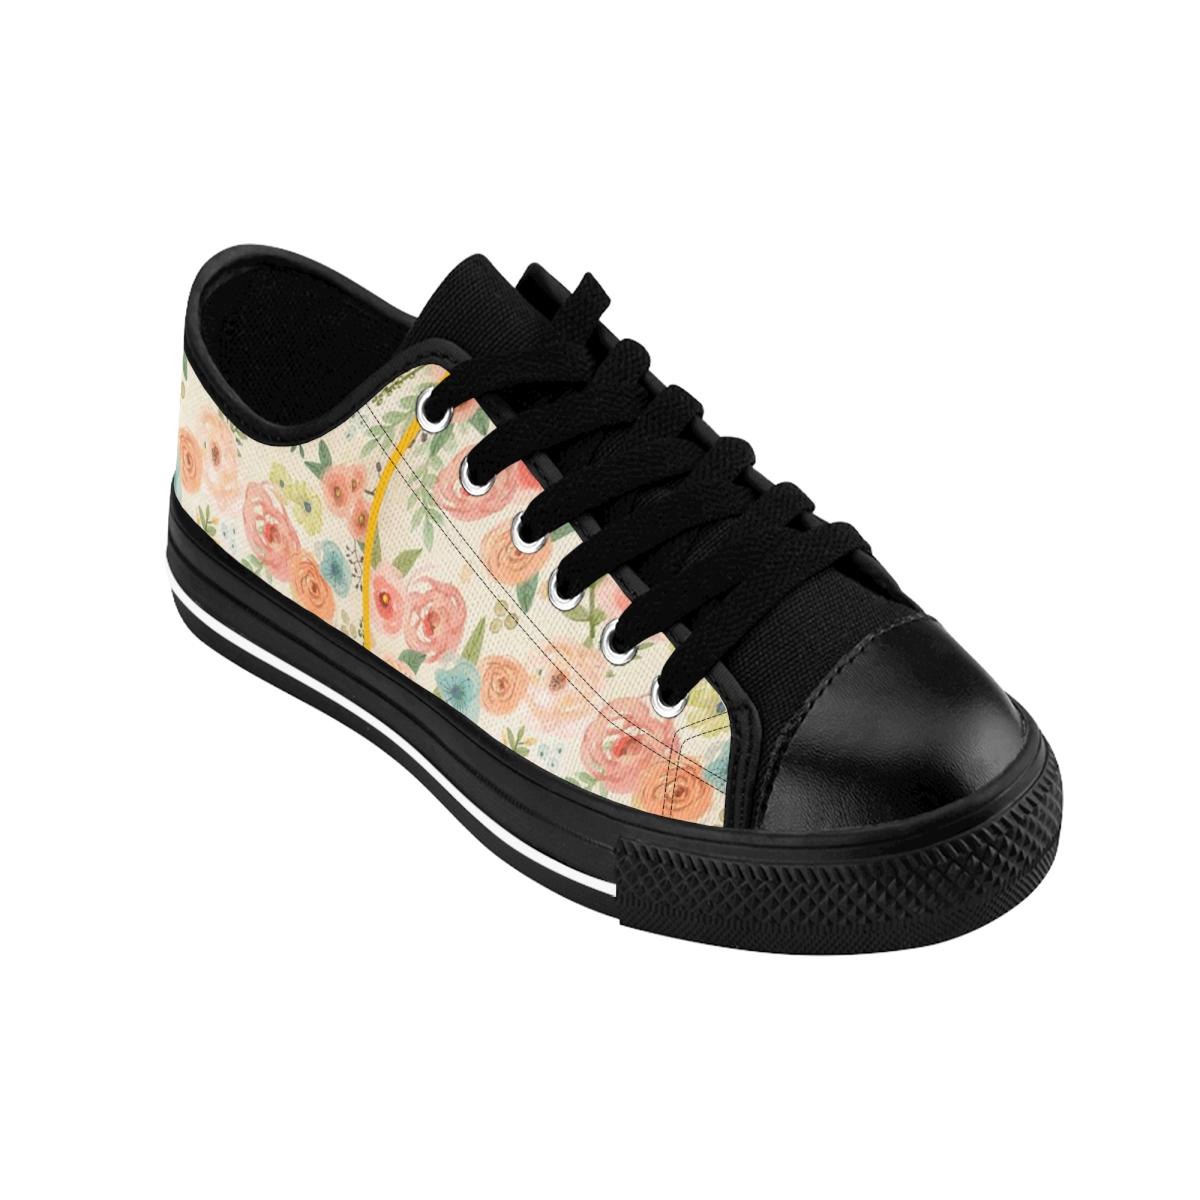 Women's Sneakers-Flower Power product thumbnail image